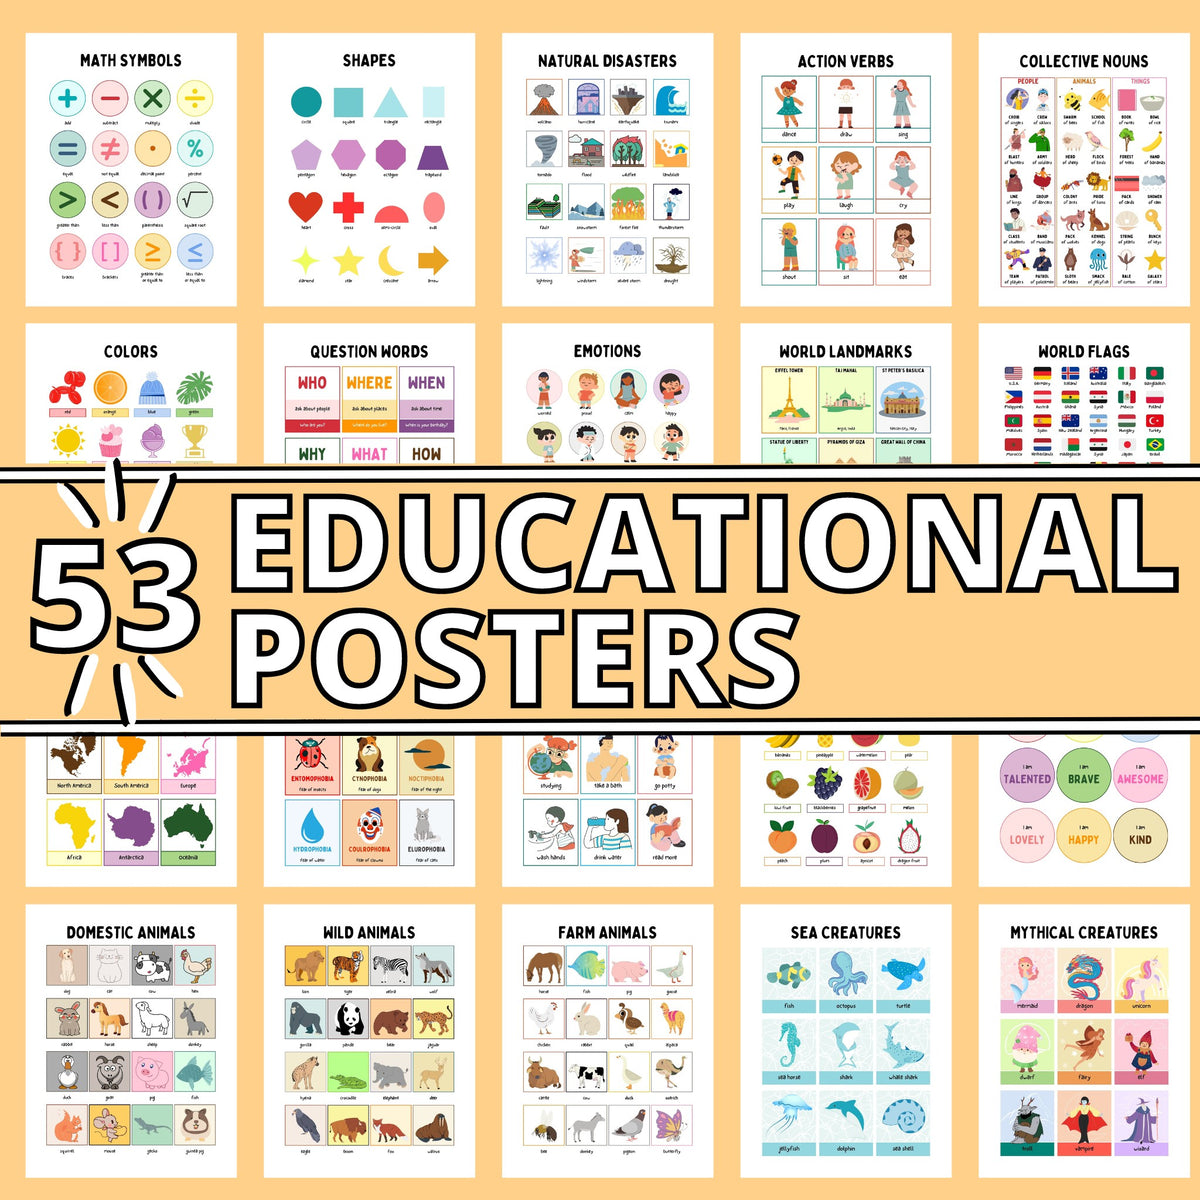 20 educational posters containing various infographics for children against a soft orange background.